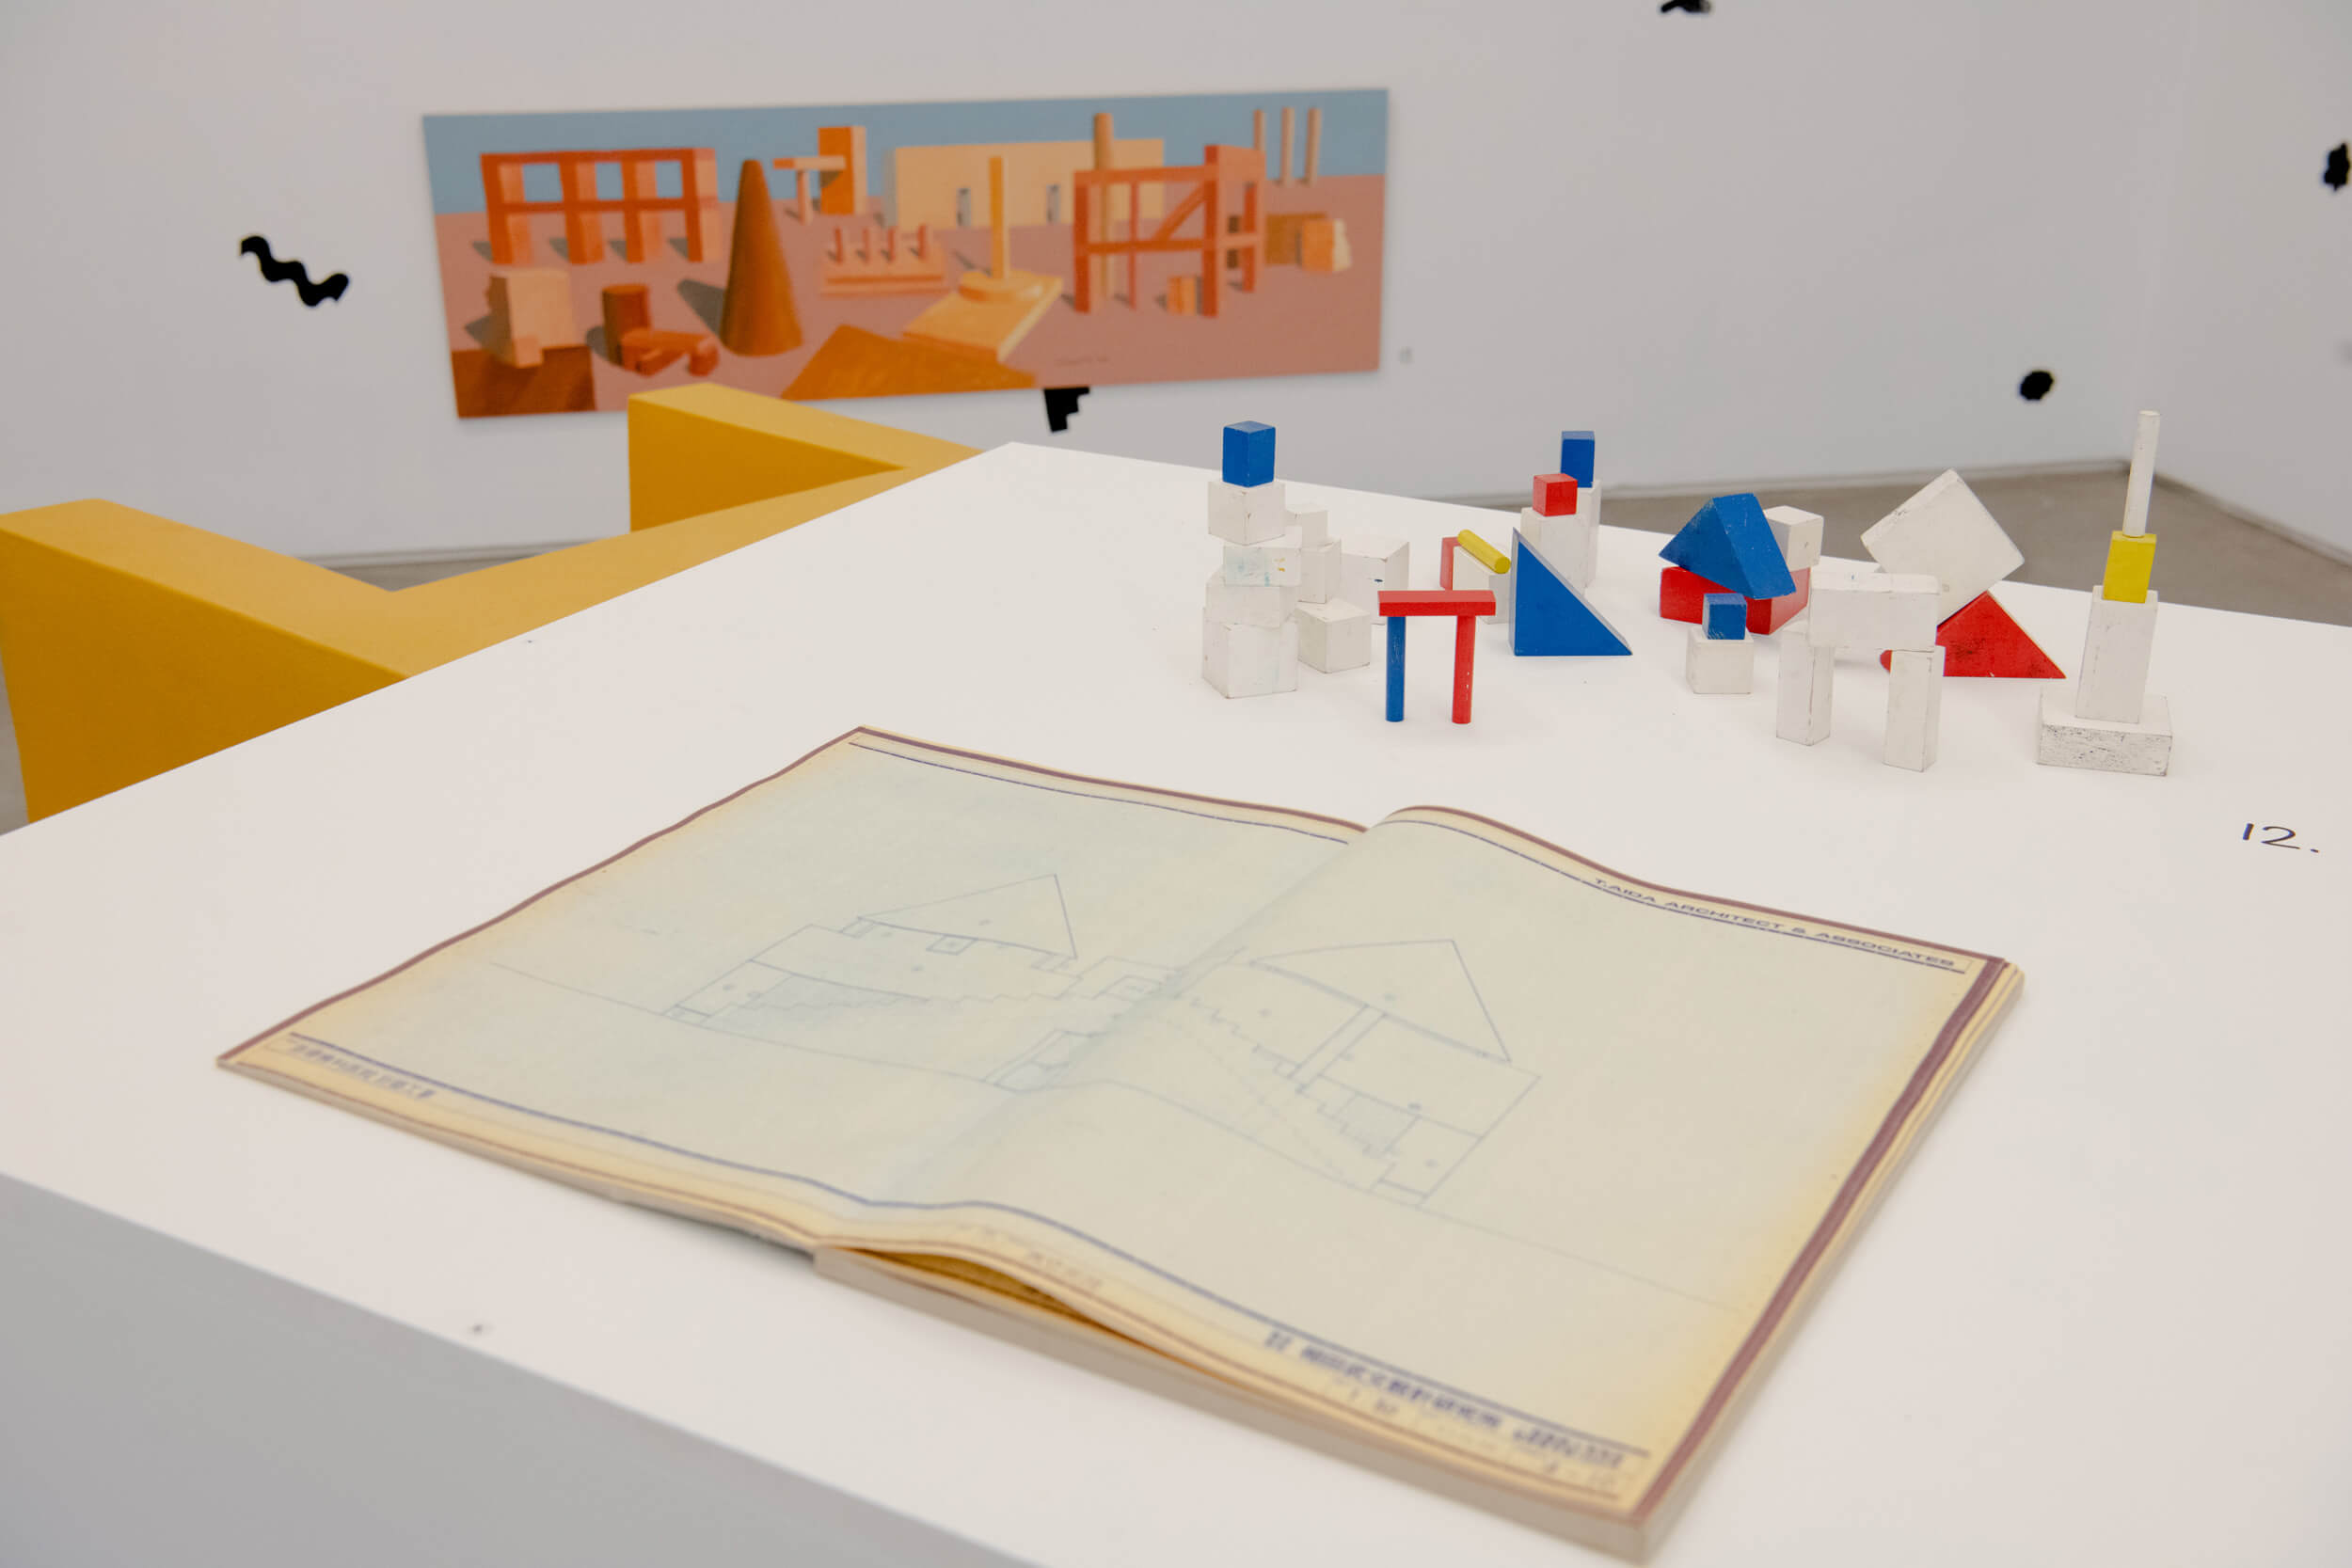 photograph of the interiors of an art gallery depicting playing blocks and painting